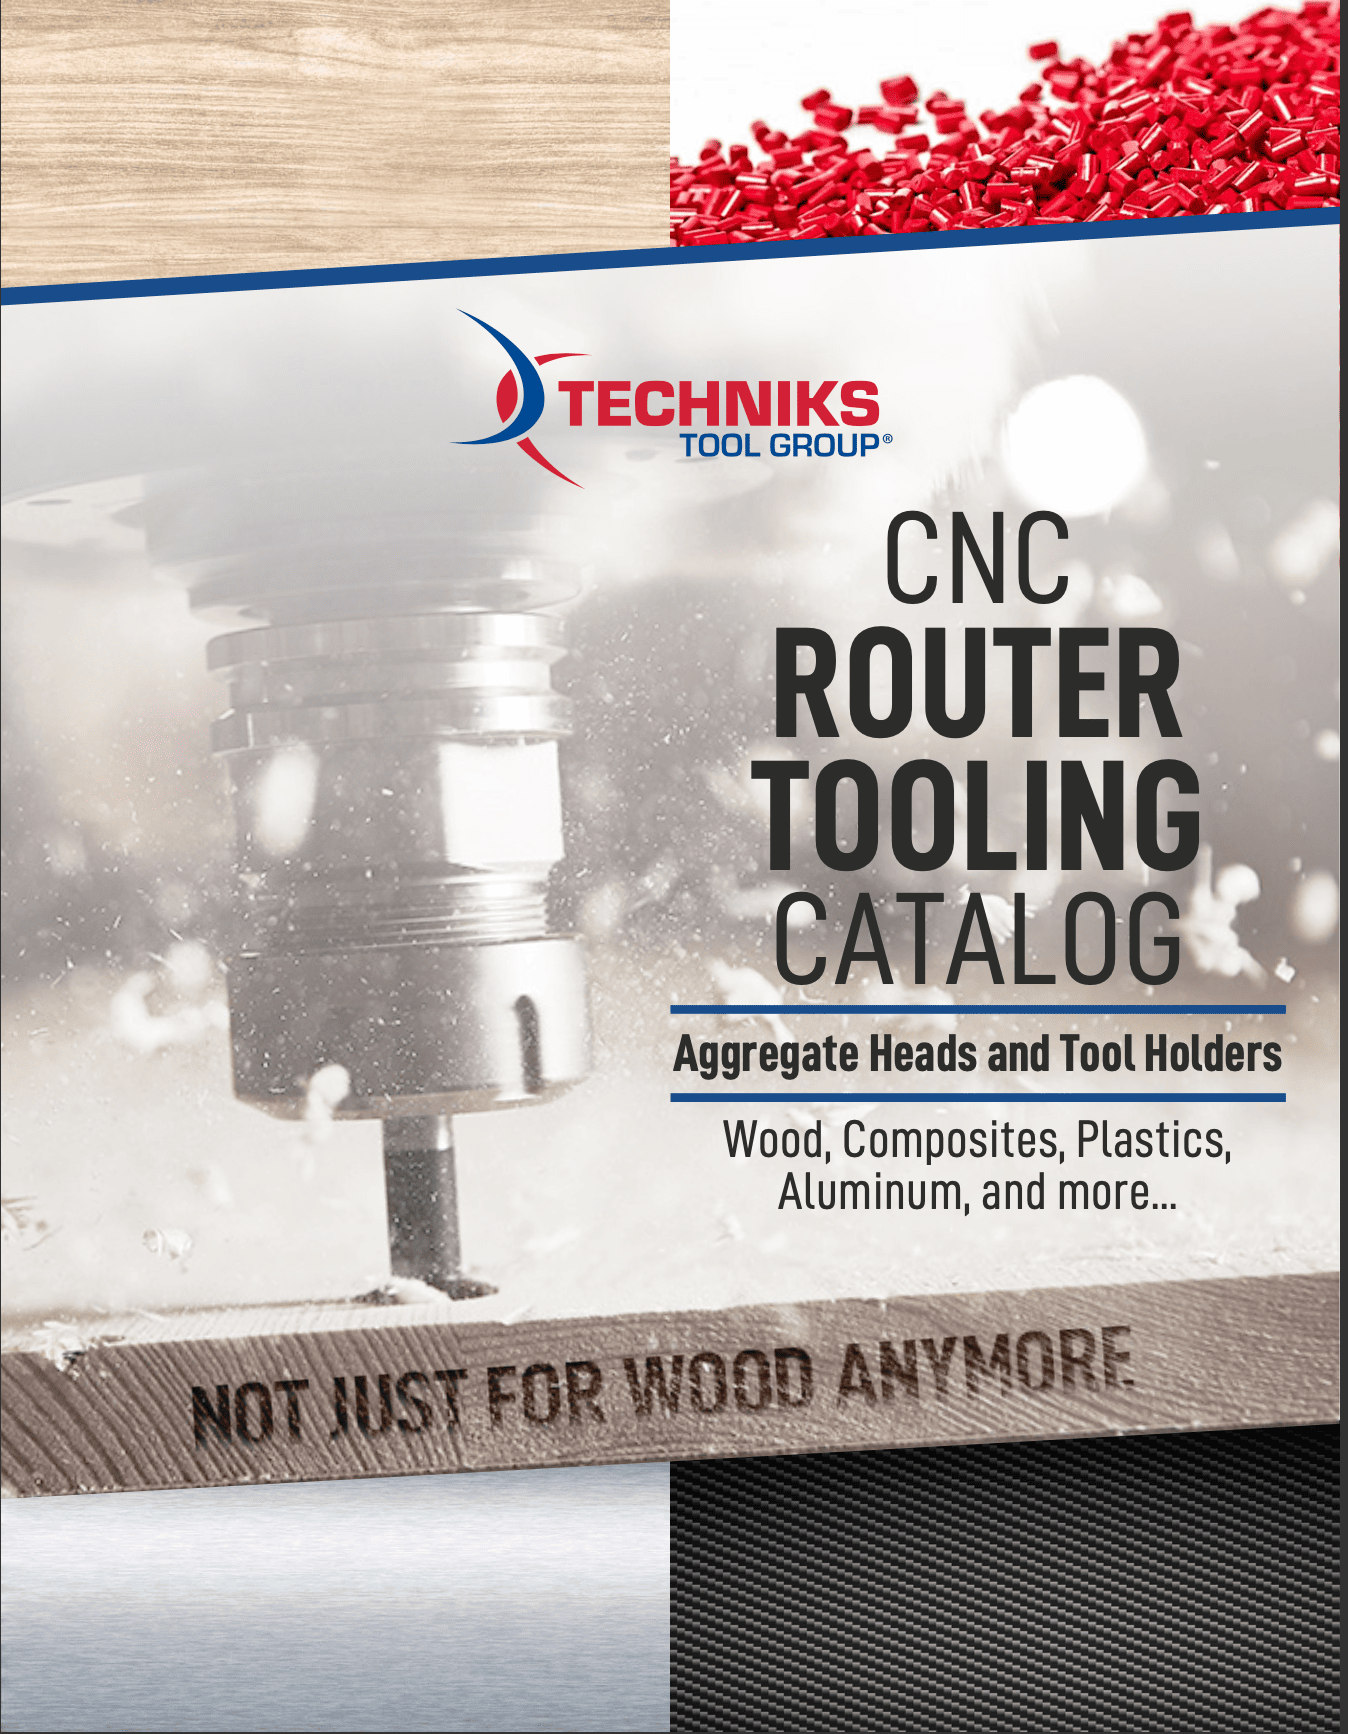 Techniks CNC Router Tooling